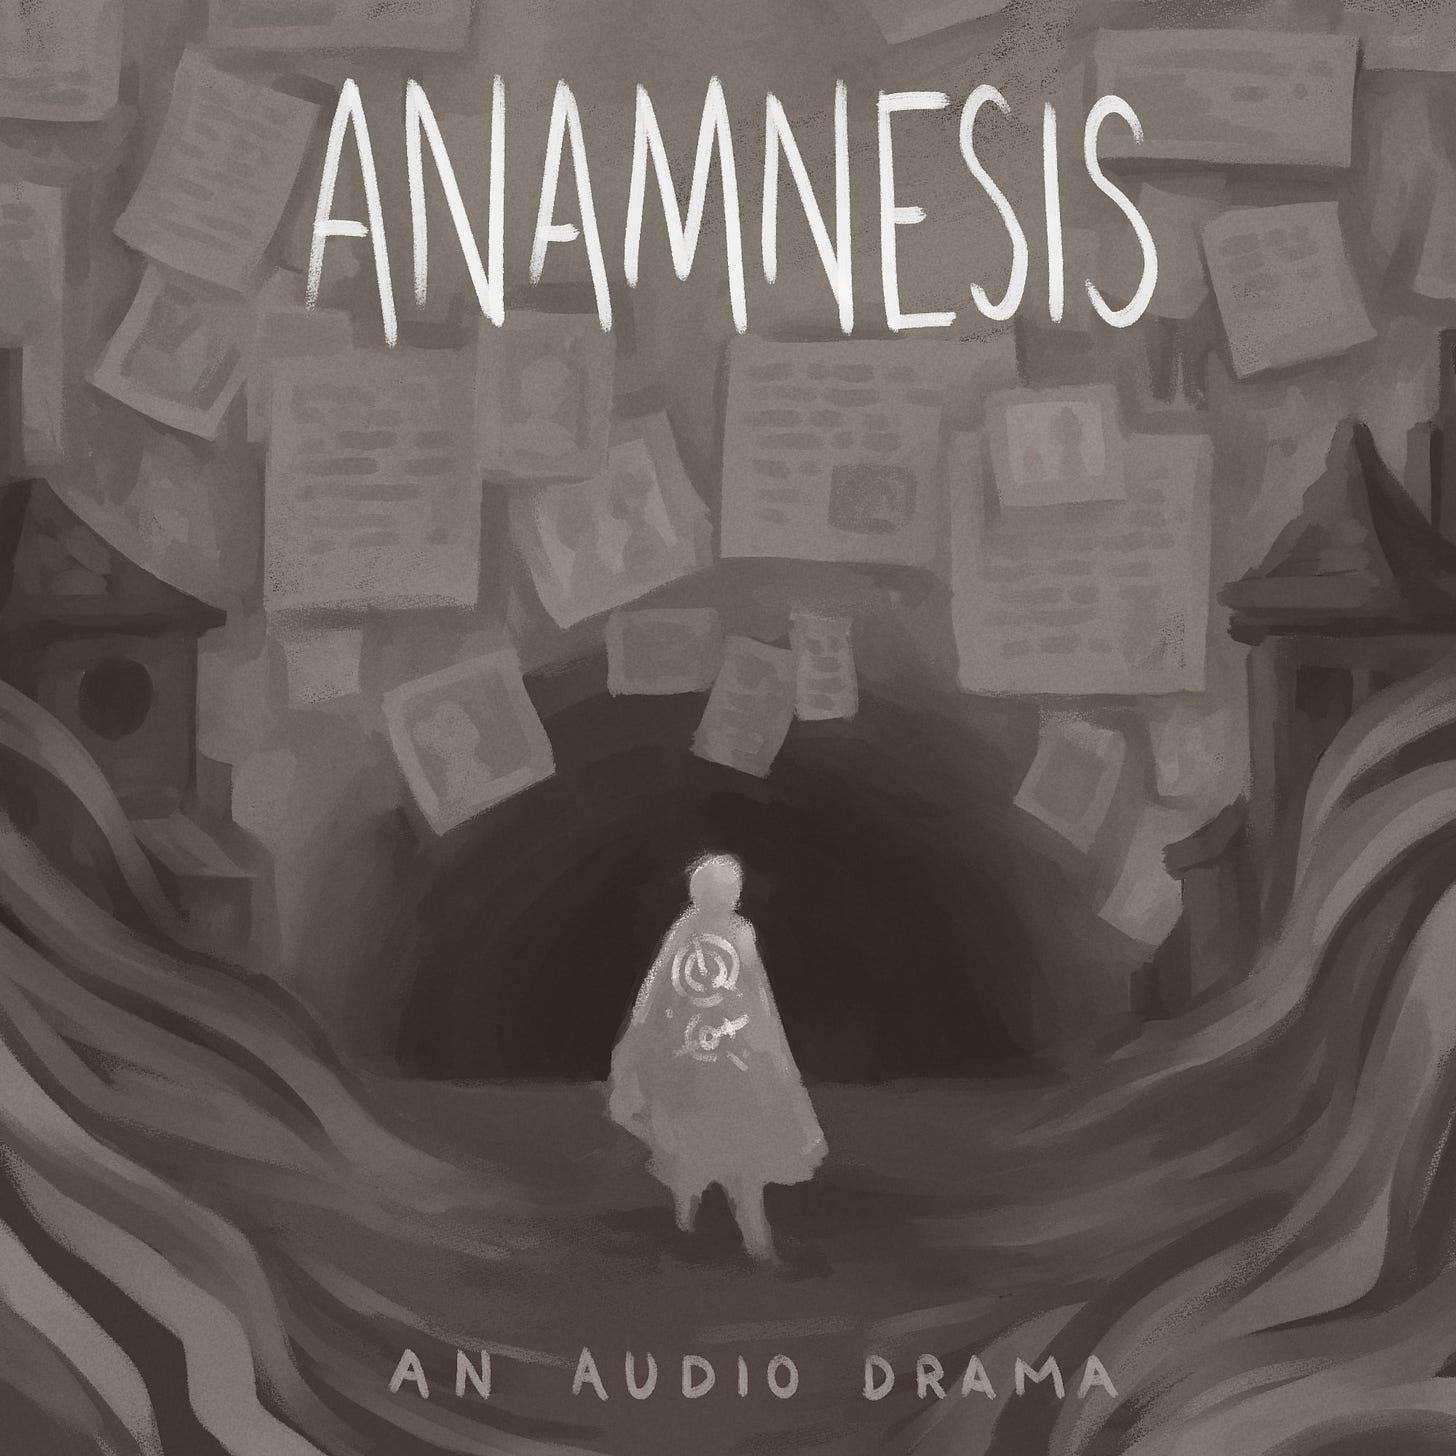 The album art for the Anamnesis audio drama. It shows a figure standing with their back facing the viewer. There are glowing symbols in the back of their cloak. To the sides of them are buildings and in front of them is a wall of pictures and papers. The colors are the same shades of brown used for the cover art of Anamnesis.